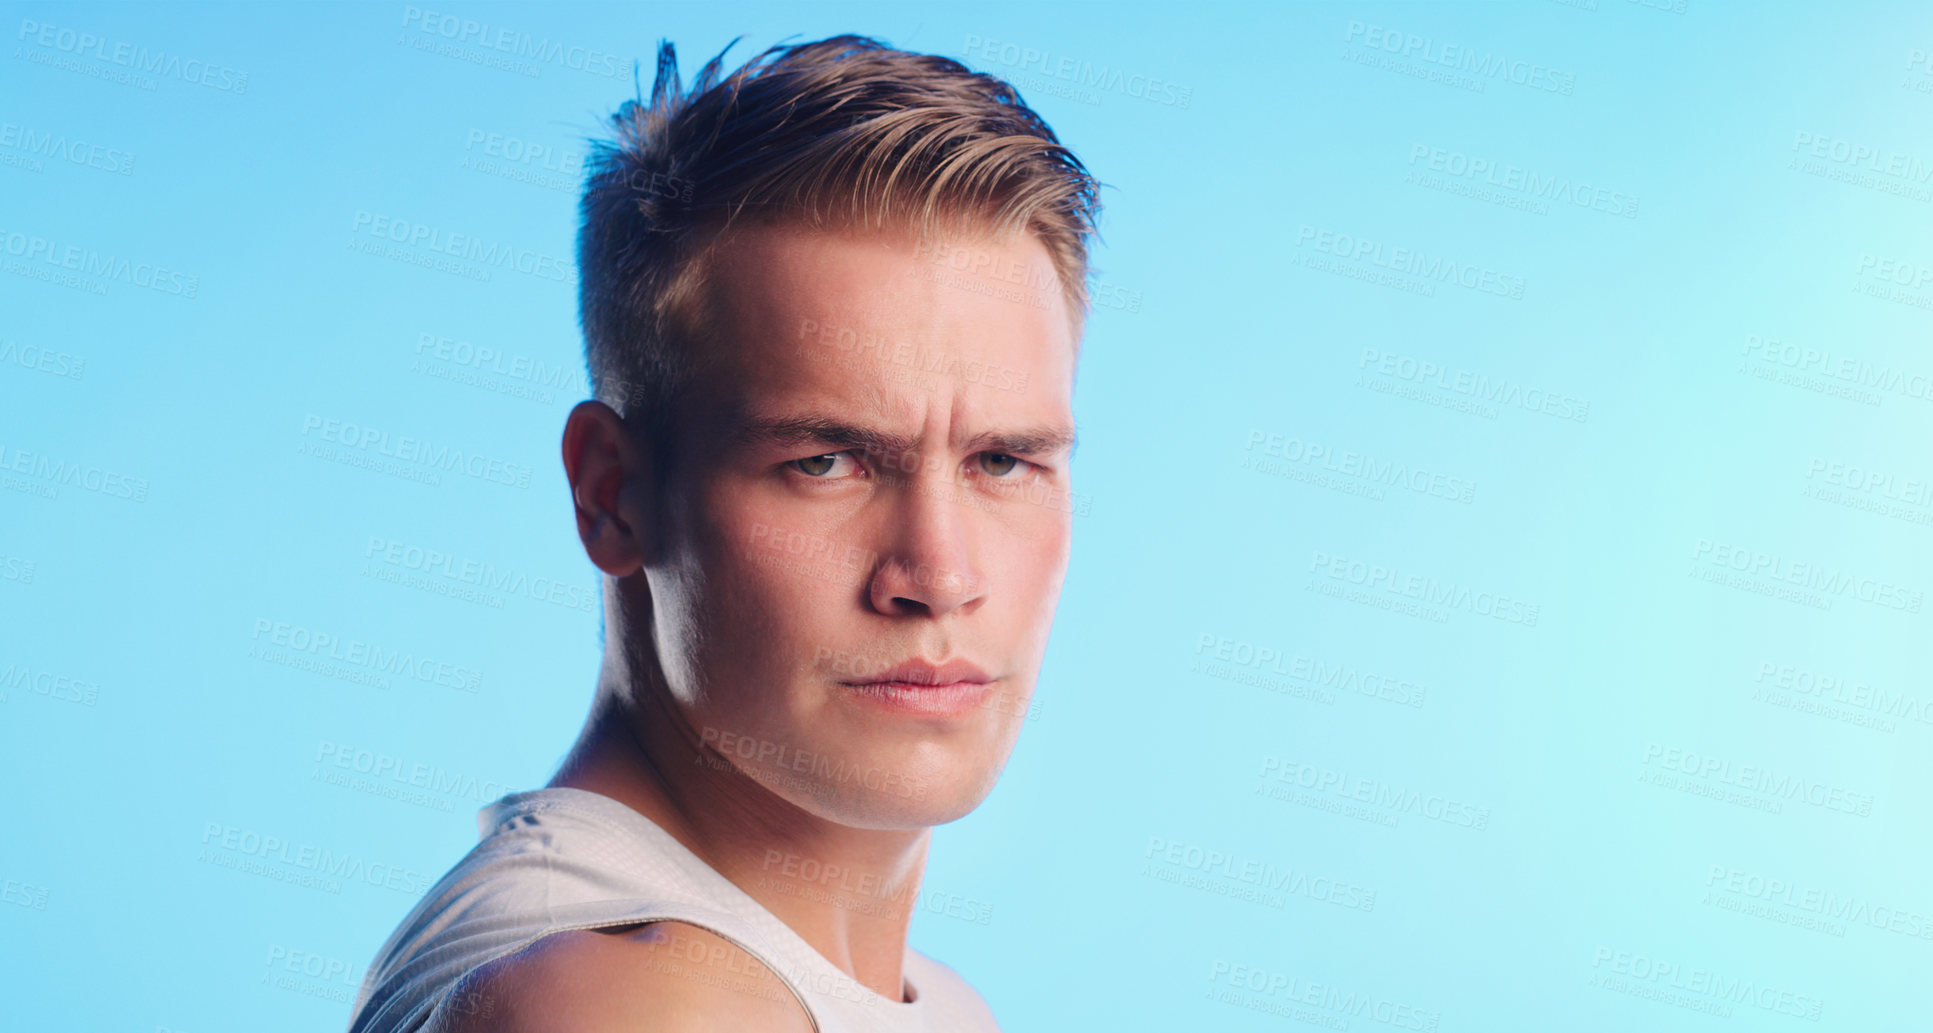 Buy stock photo Studio portrait of a handsome young man posing against a blue background